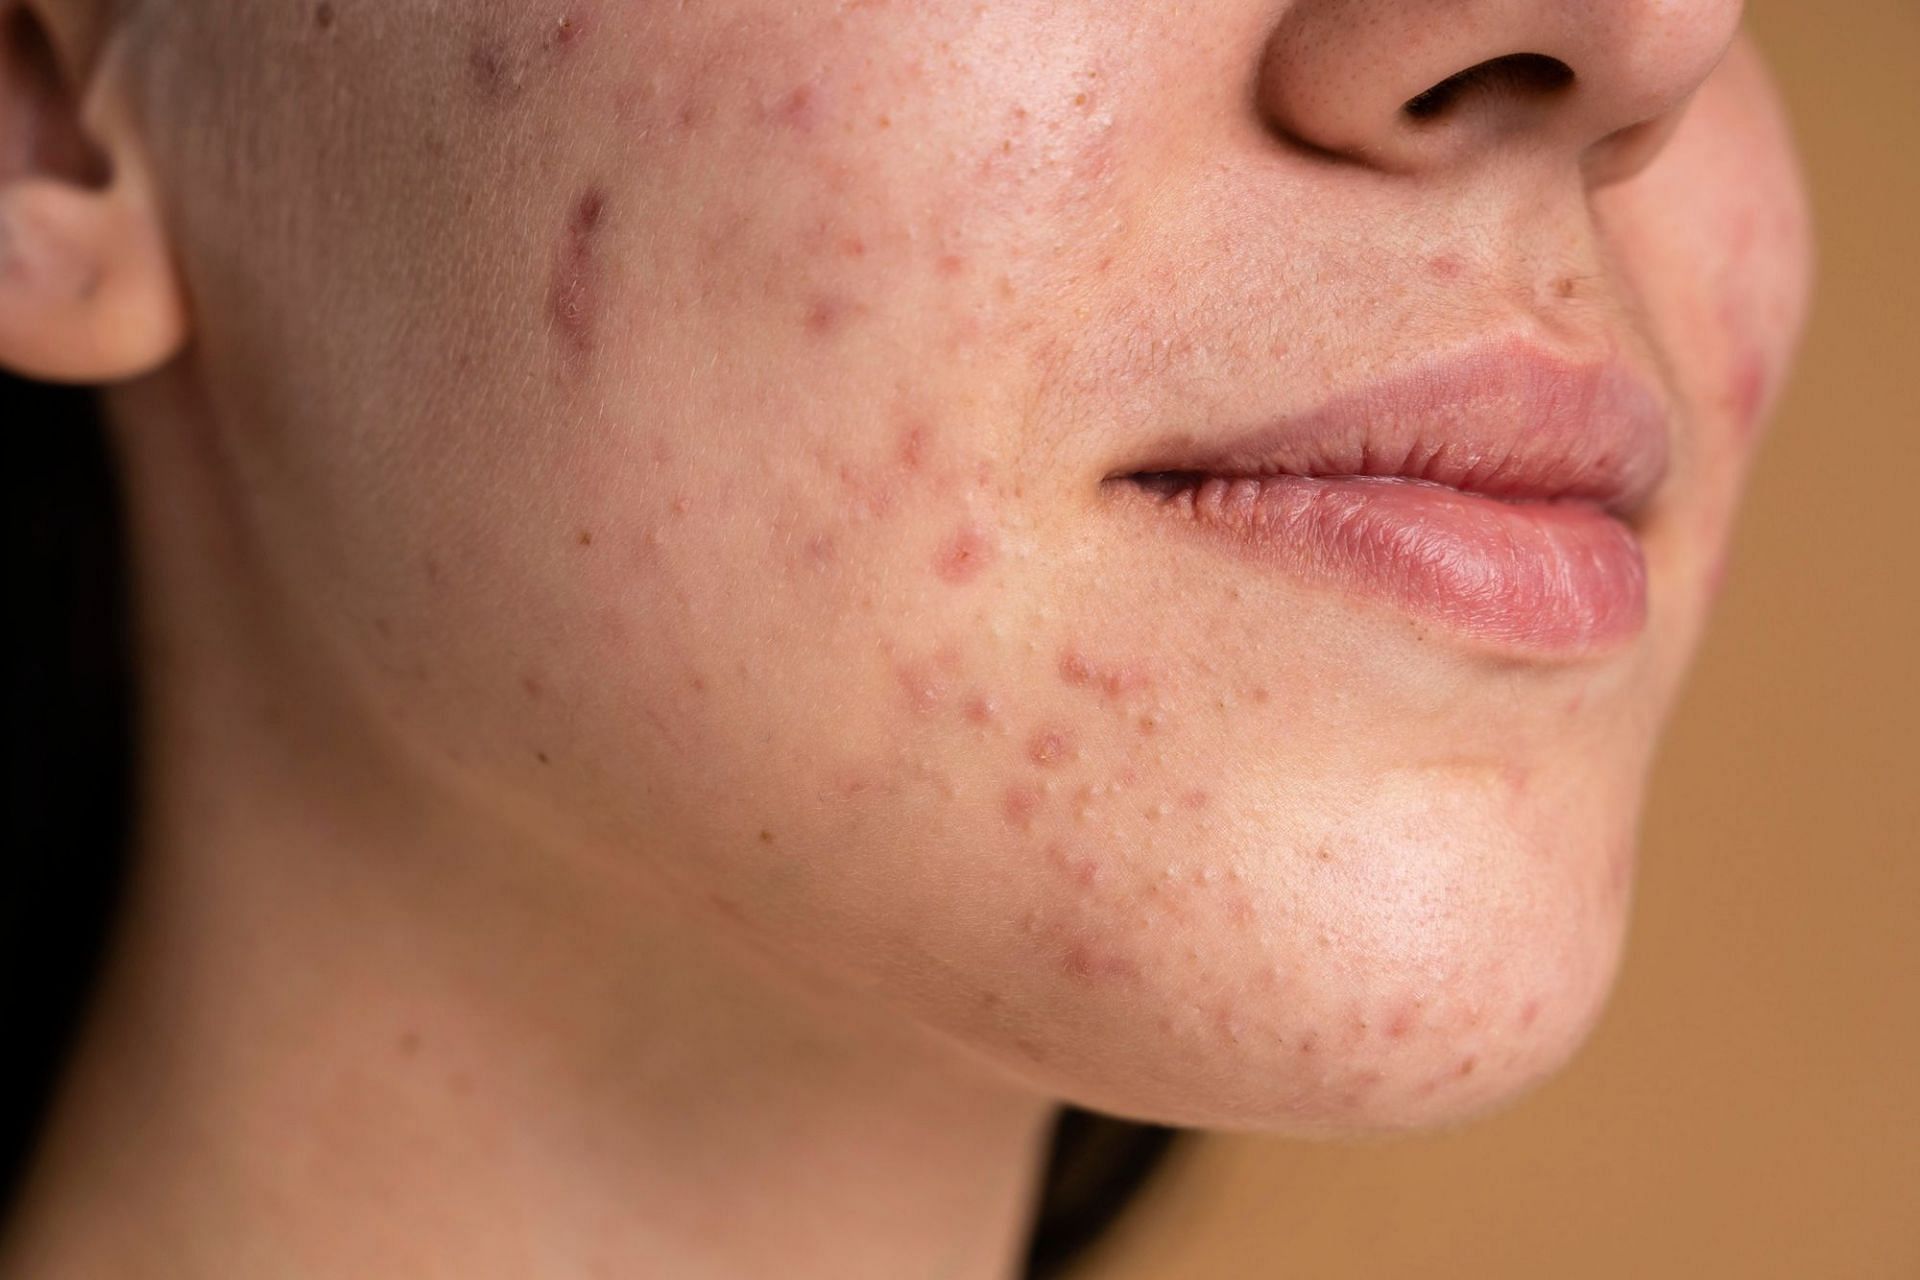 Open pores can be dealt with in a number of ways, some of which can be practiced at home (Image via freepik)